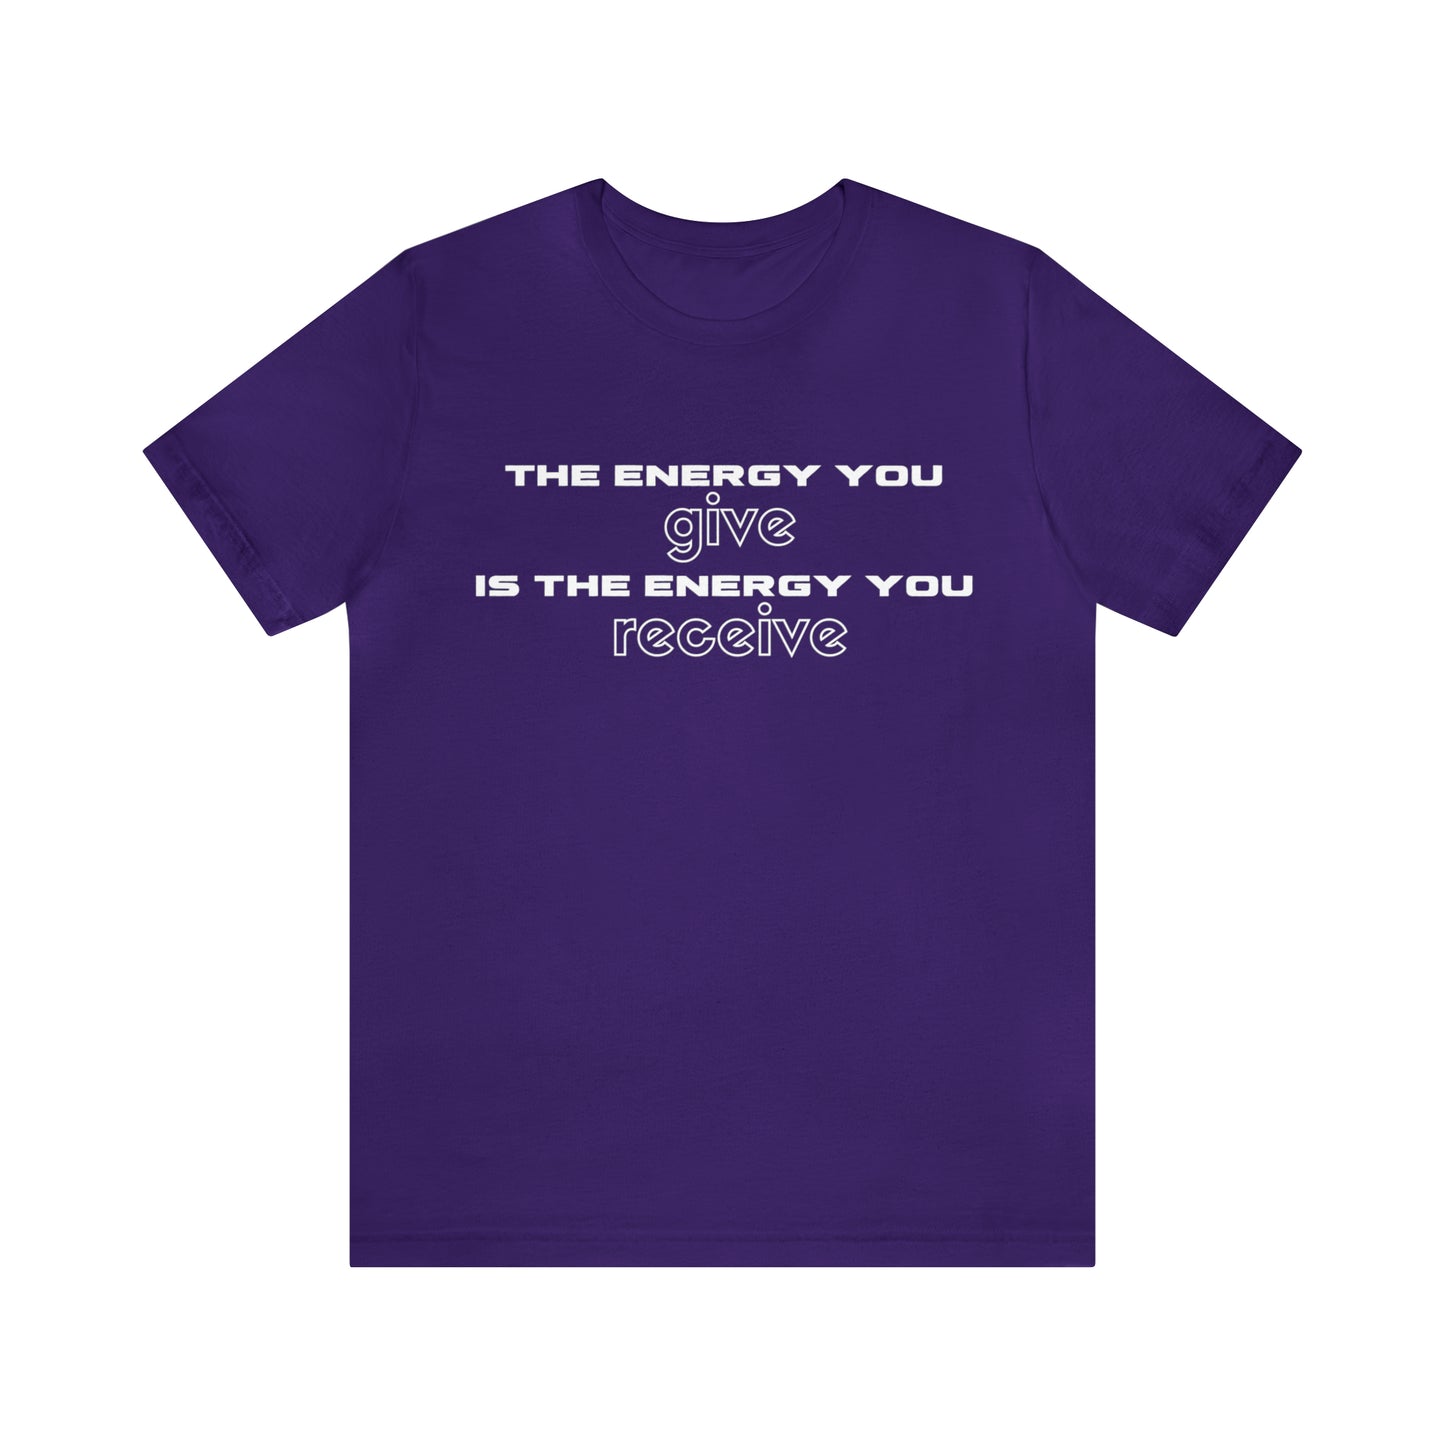 Receive the Energy You Give Unisex Tee